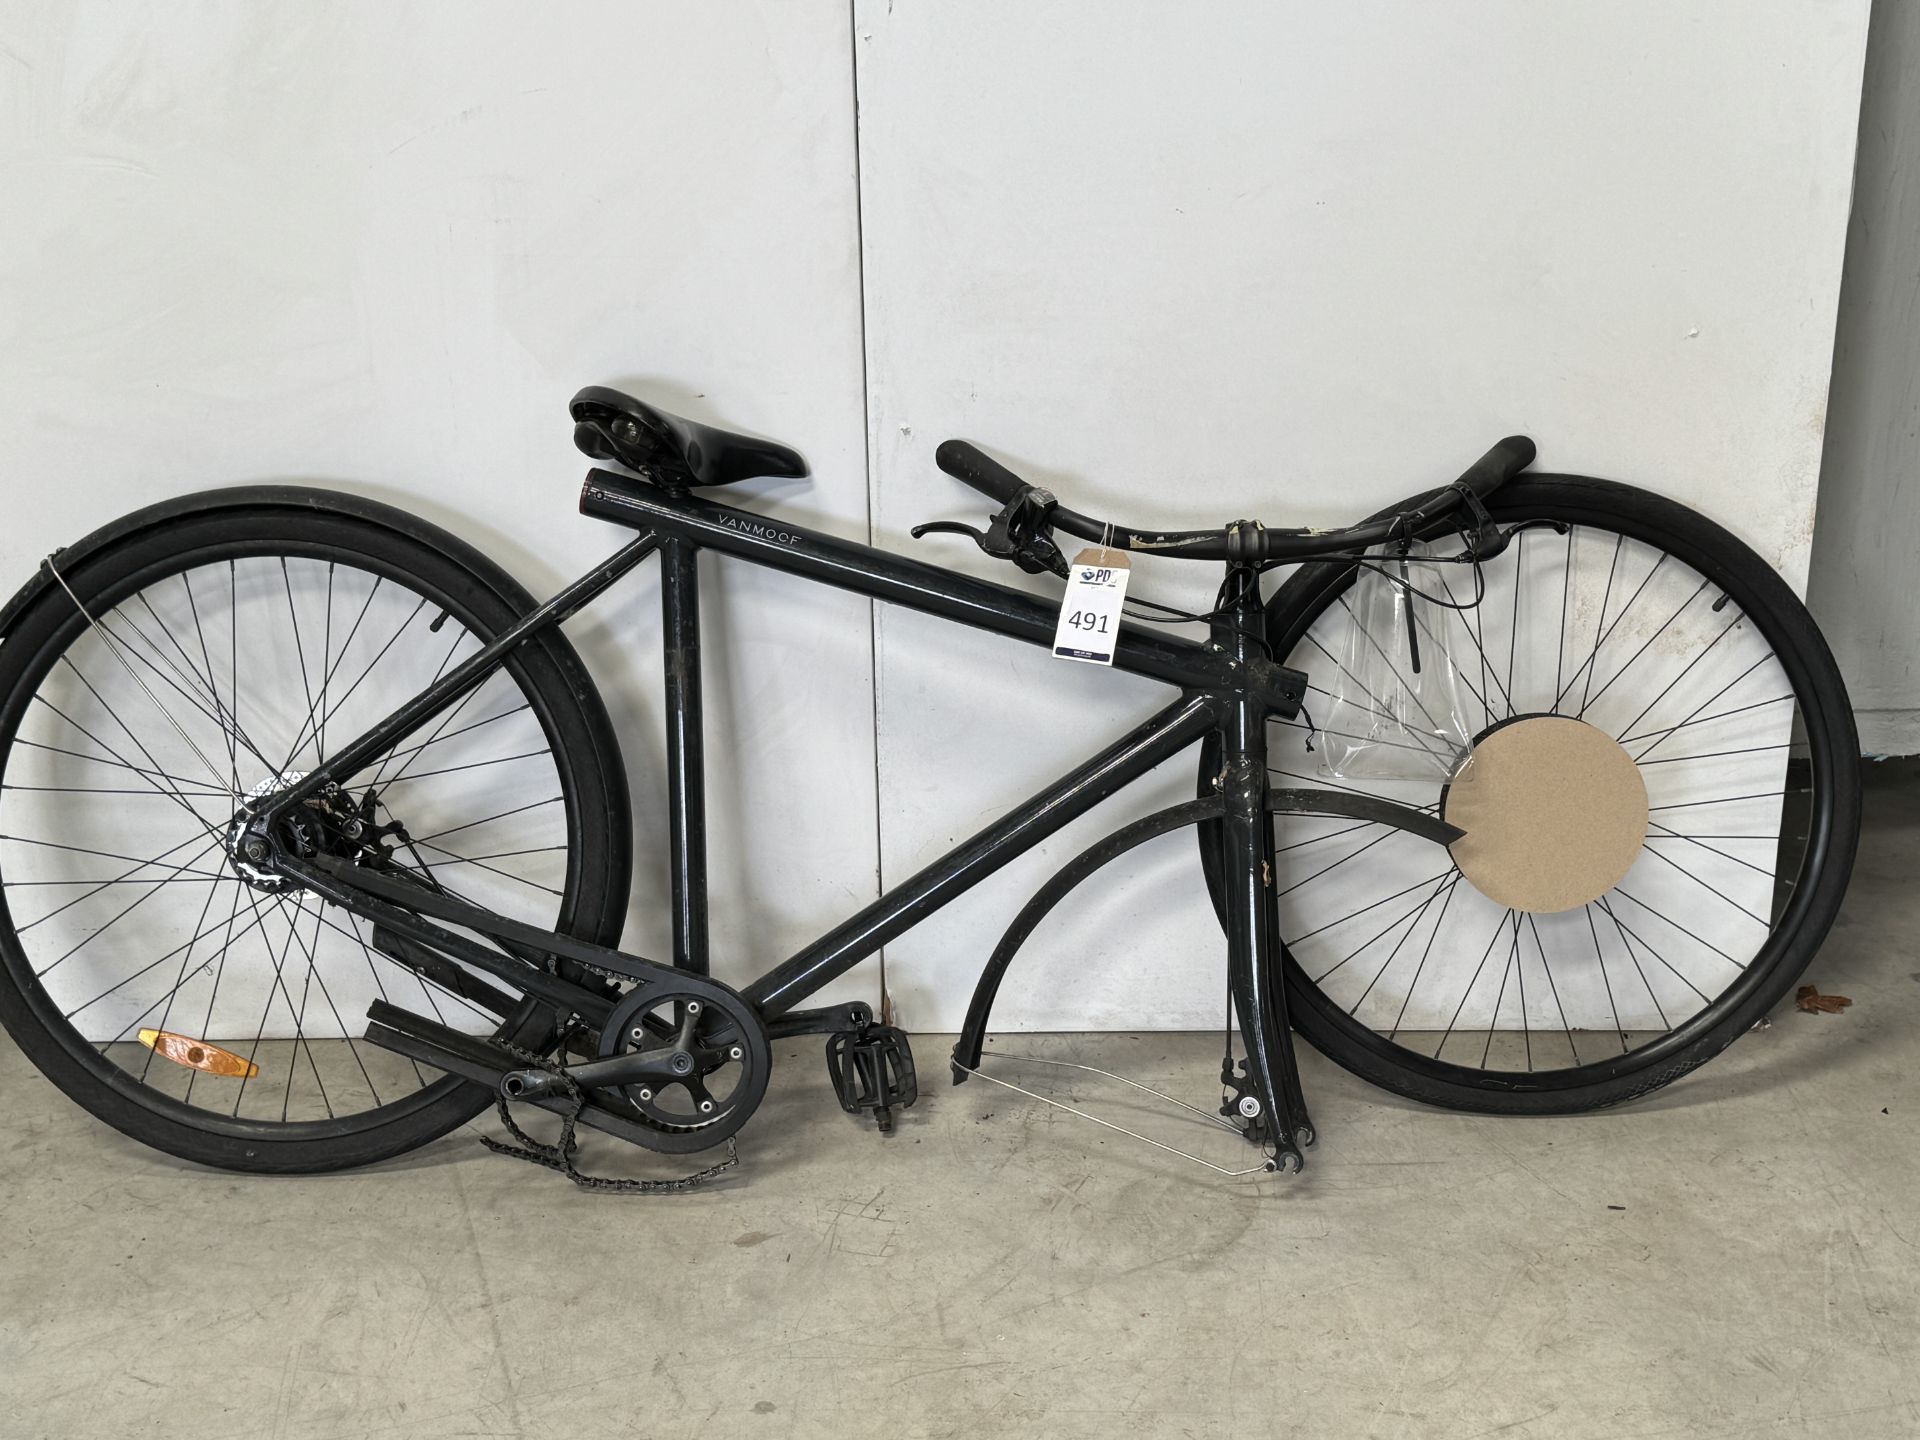 VanMoof S3 Electric Bike, Frame Number ASY311172 (NOT ROADWORTHY - FOR SPARES ONLY) (No codes